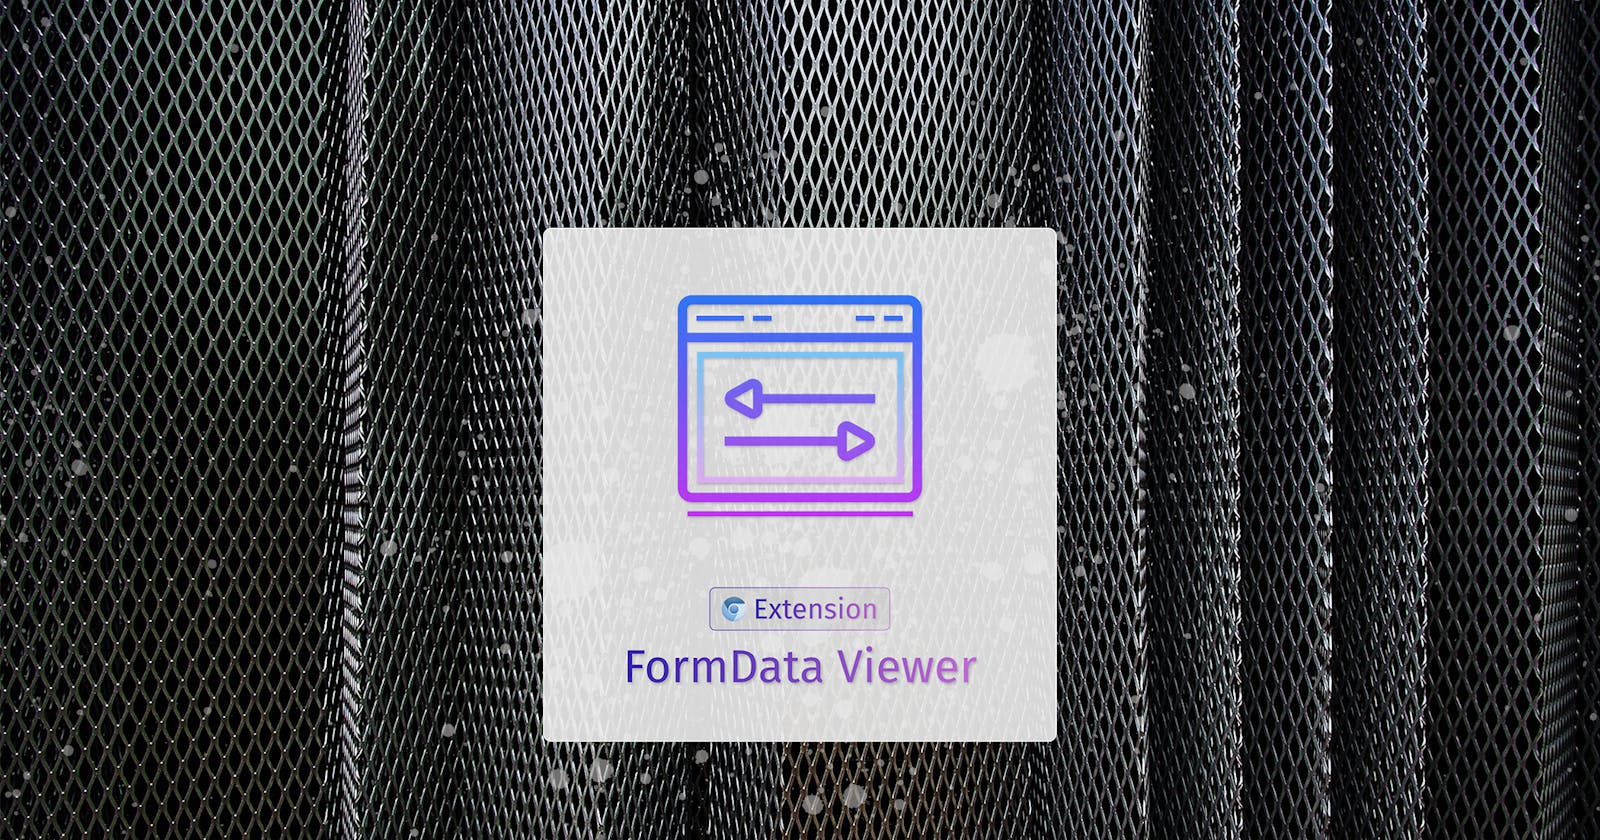 Introducing the FormData Viewer Extension